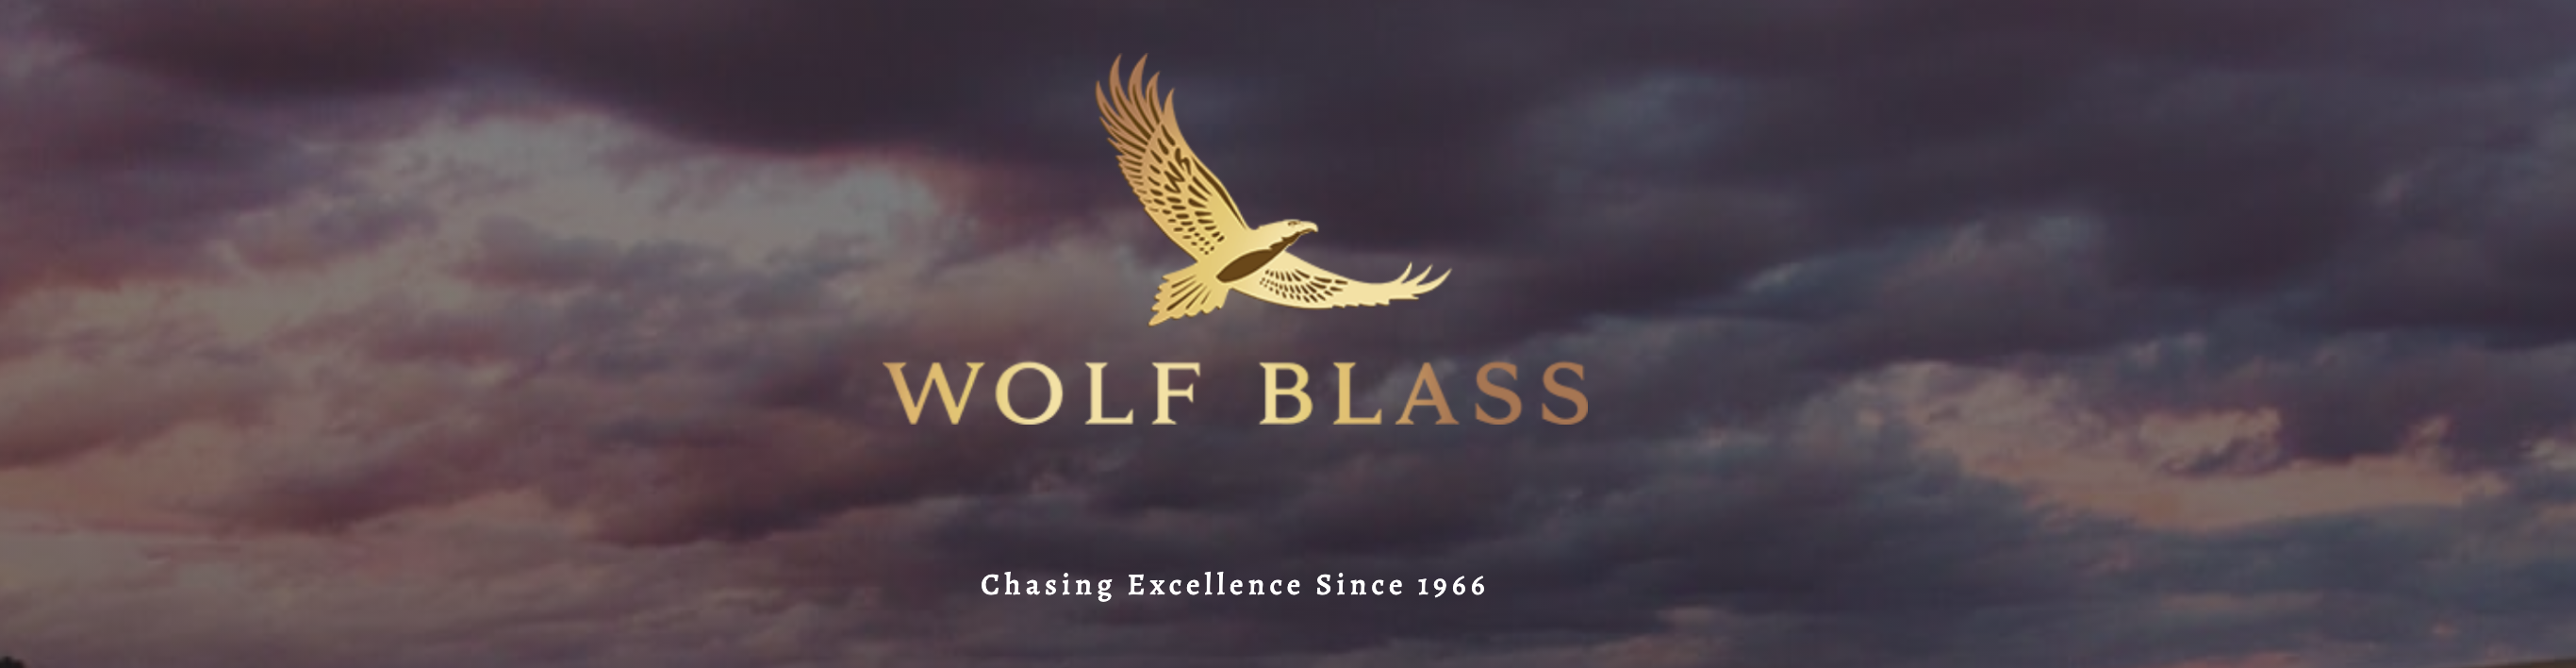 Wolf Blass crowned 2021 ‘Red Winemaker of the Year’ for the 4th time at prestigious global wine competition